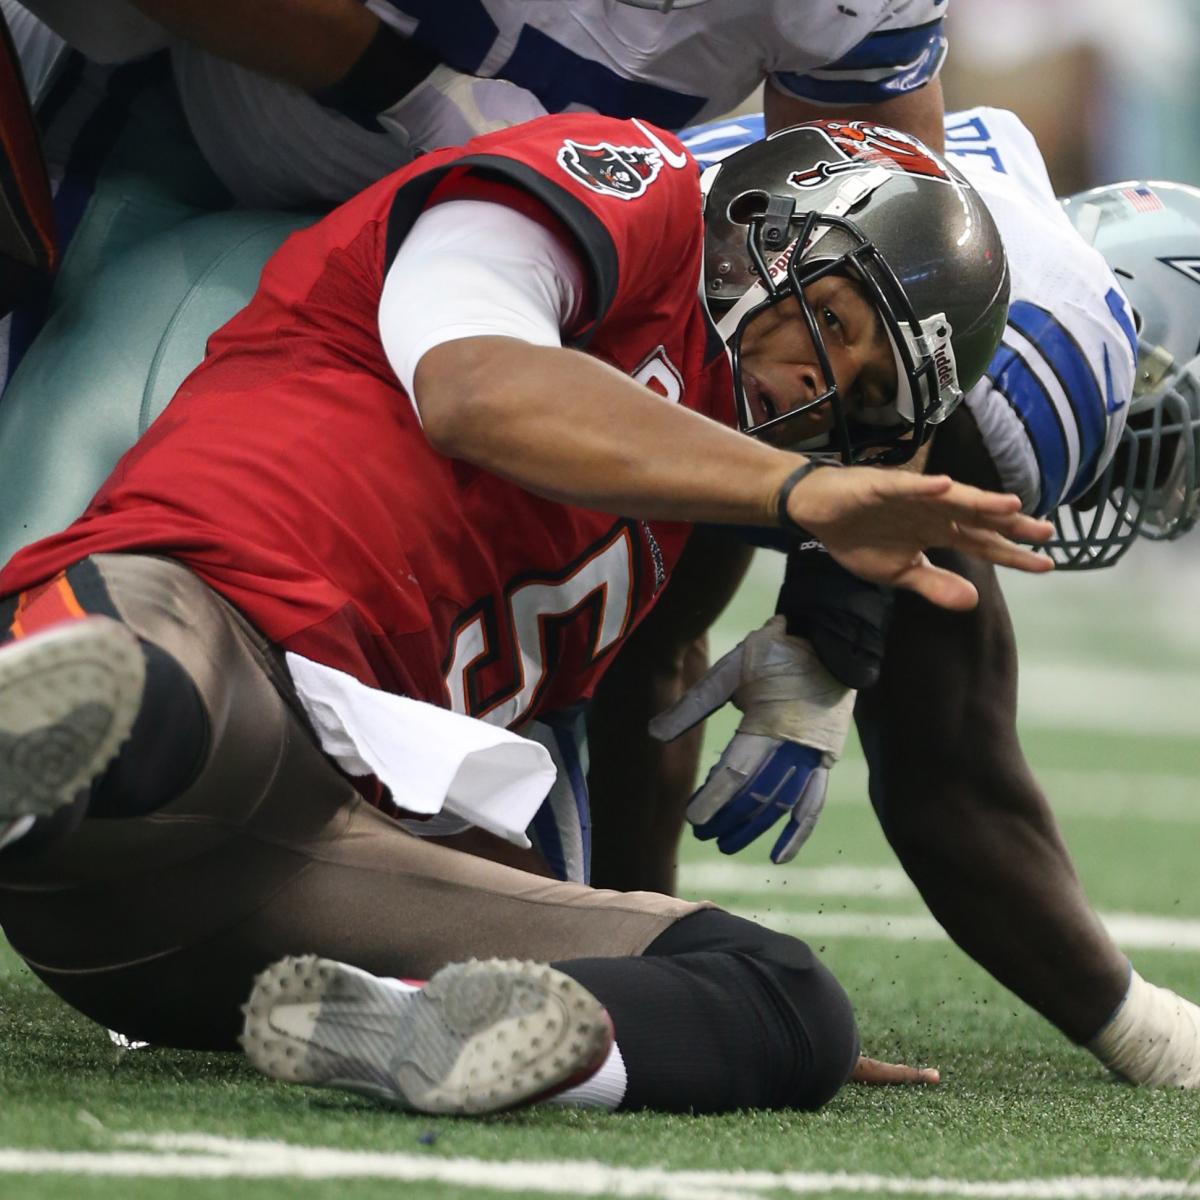 Tampa Bay vs. Dallas Instant Analysis of the Bucs' Loss to the Cowboys